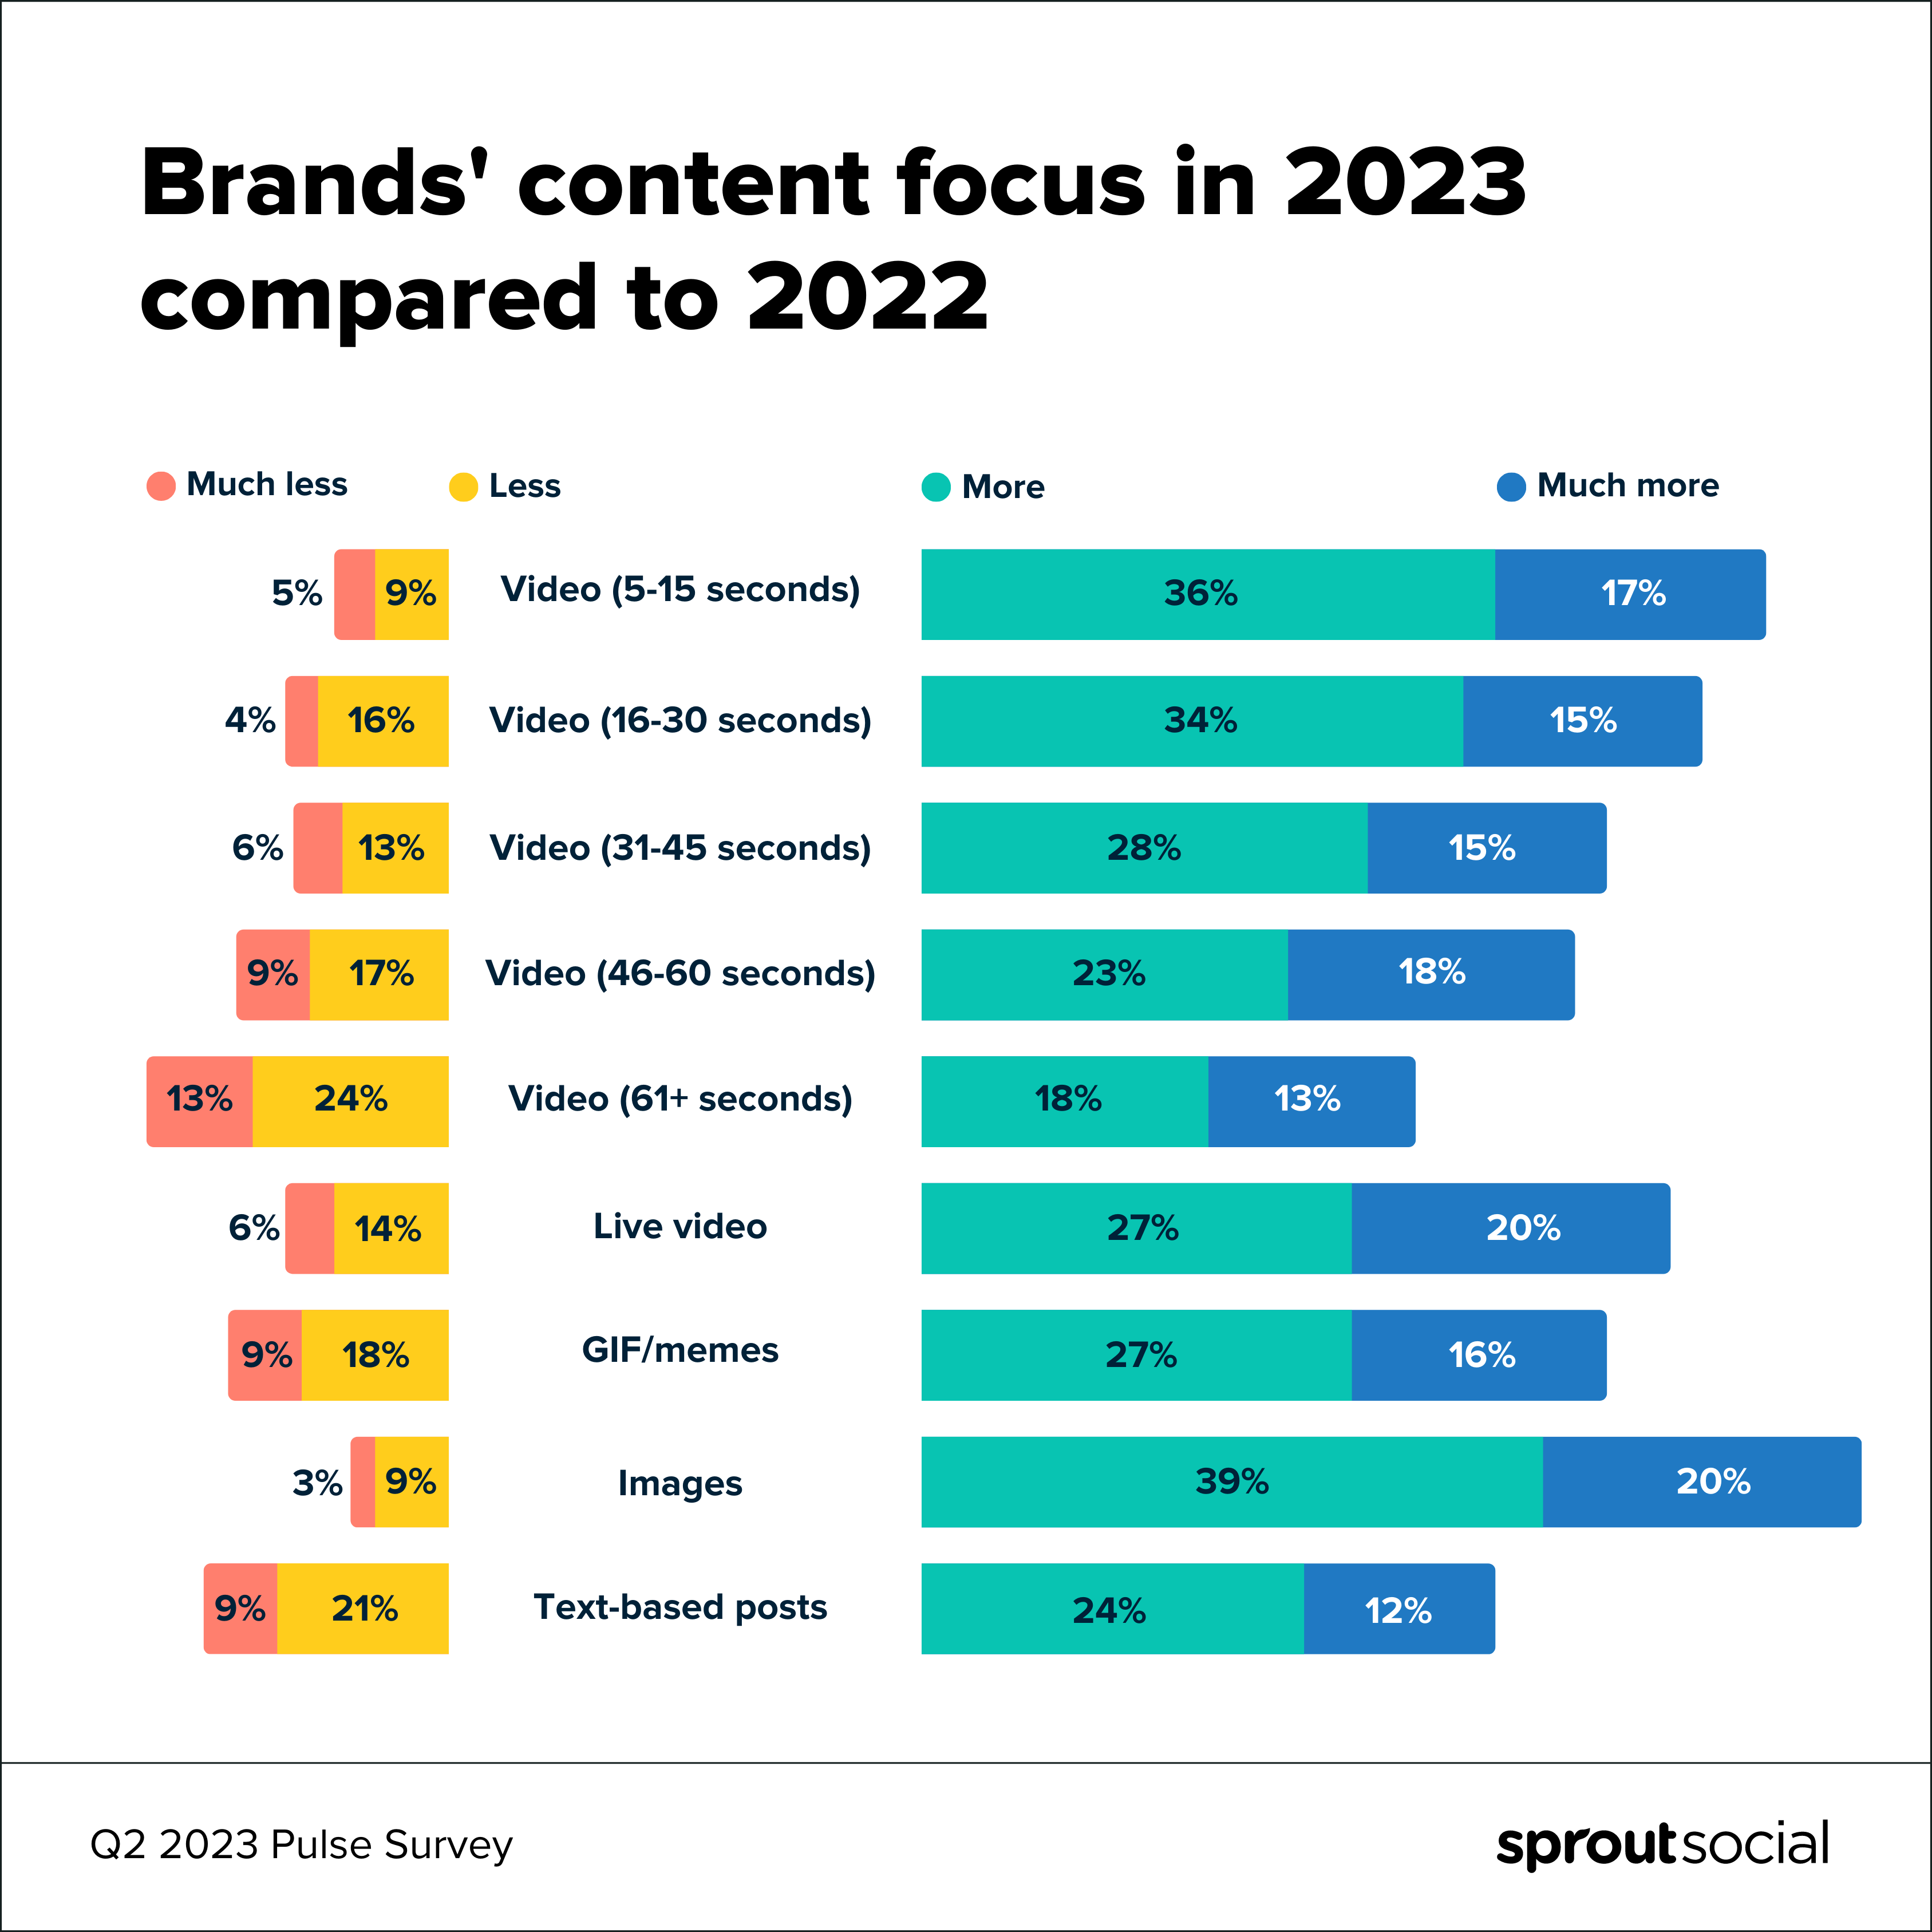 Sprout Social Q2 2023 Pulse Survey multi-color infographic reflecting brands' content focus in 2023 compared to 2022. Images are listed as the top focus, with 59% of marketers investing more time into them.